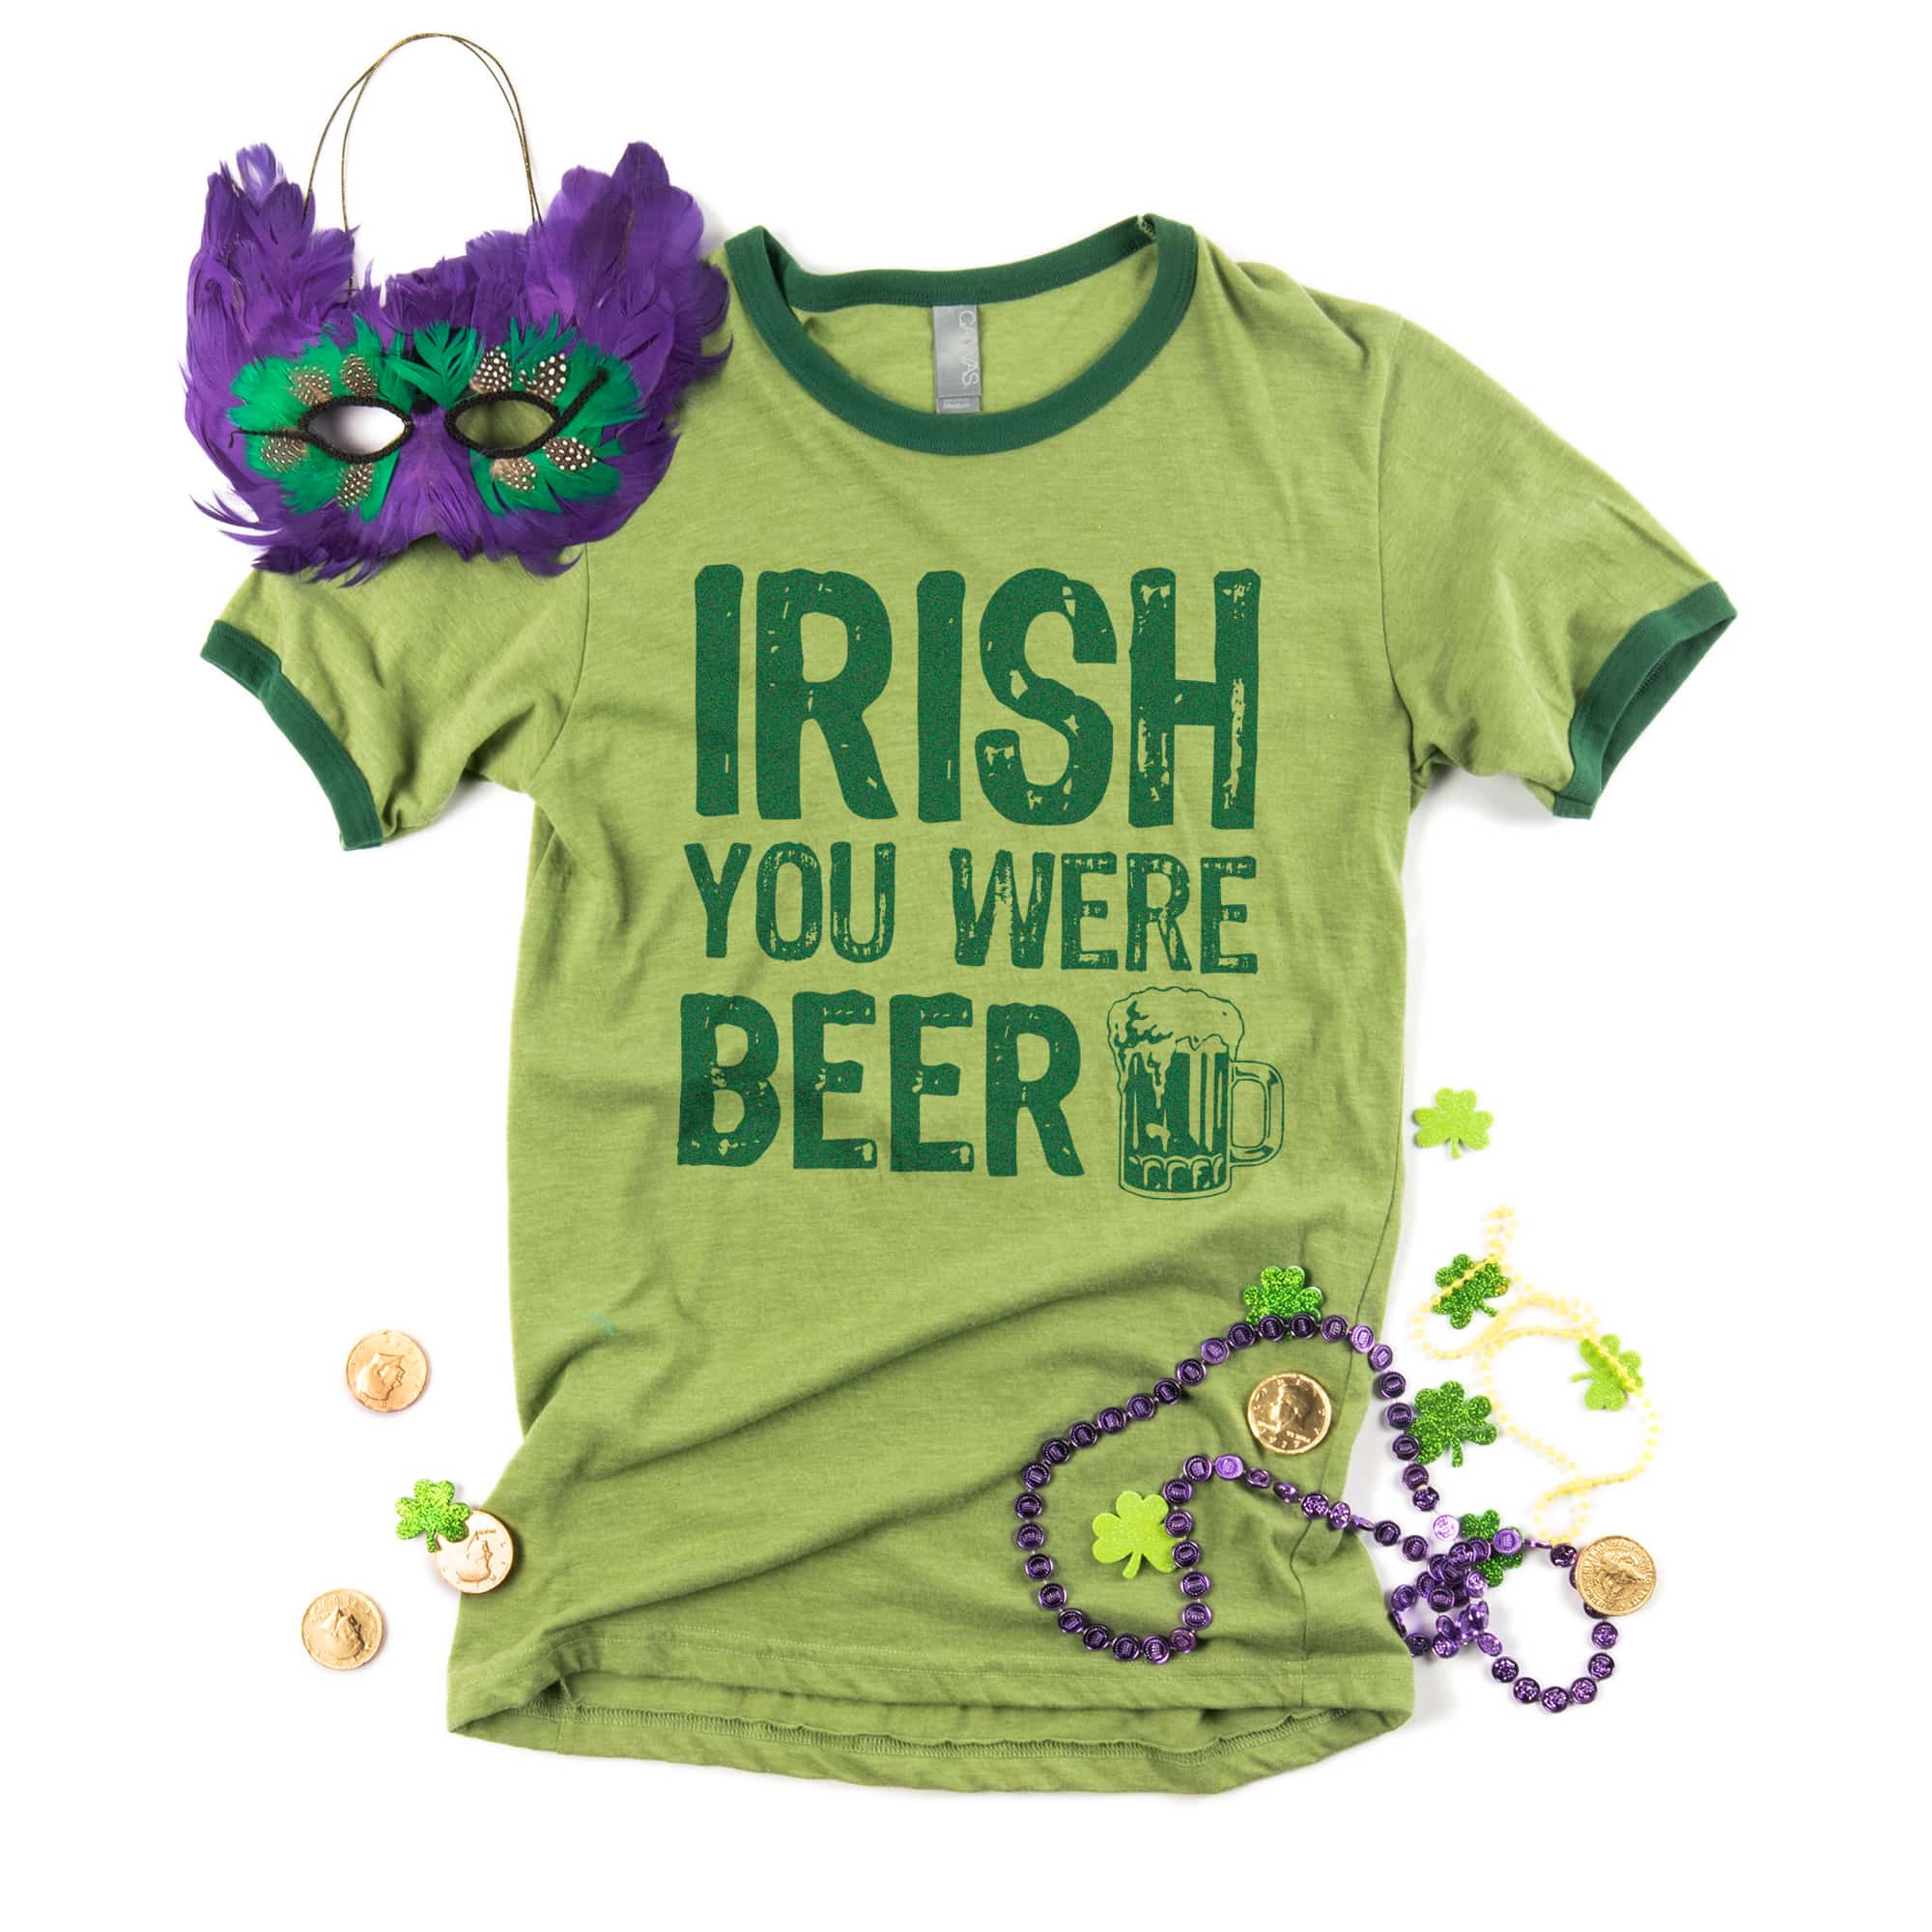 An example St. Patrick's day t-shirt design on a Canvas Ringer T-Shirt.